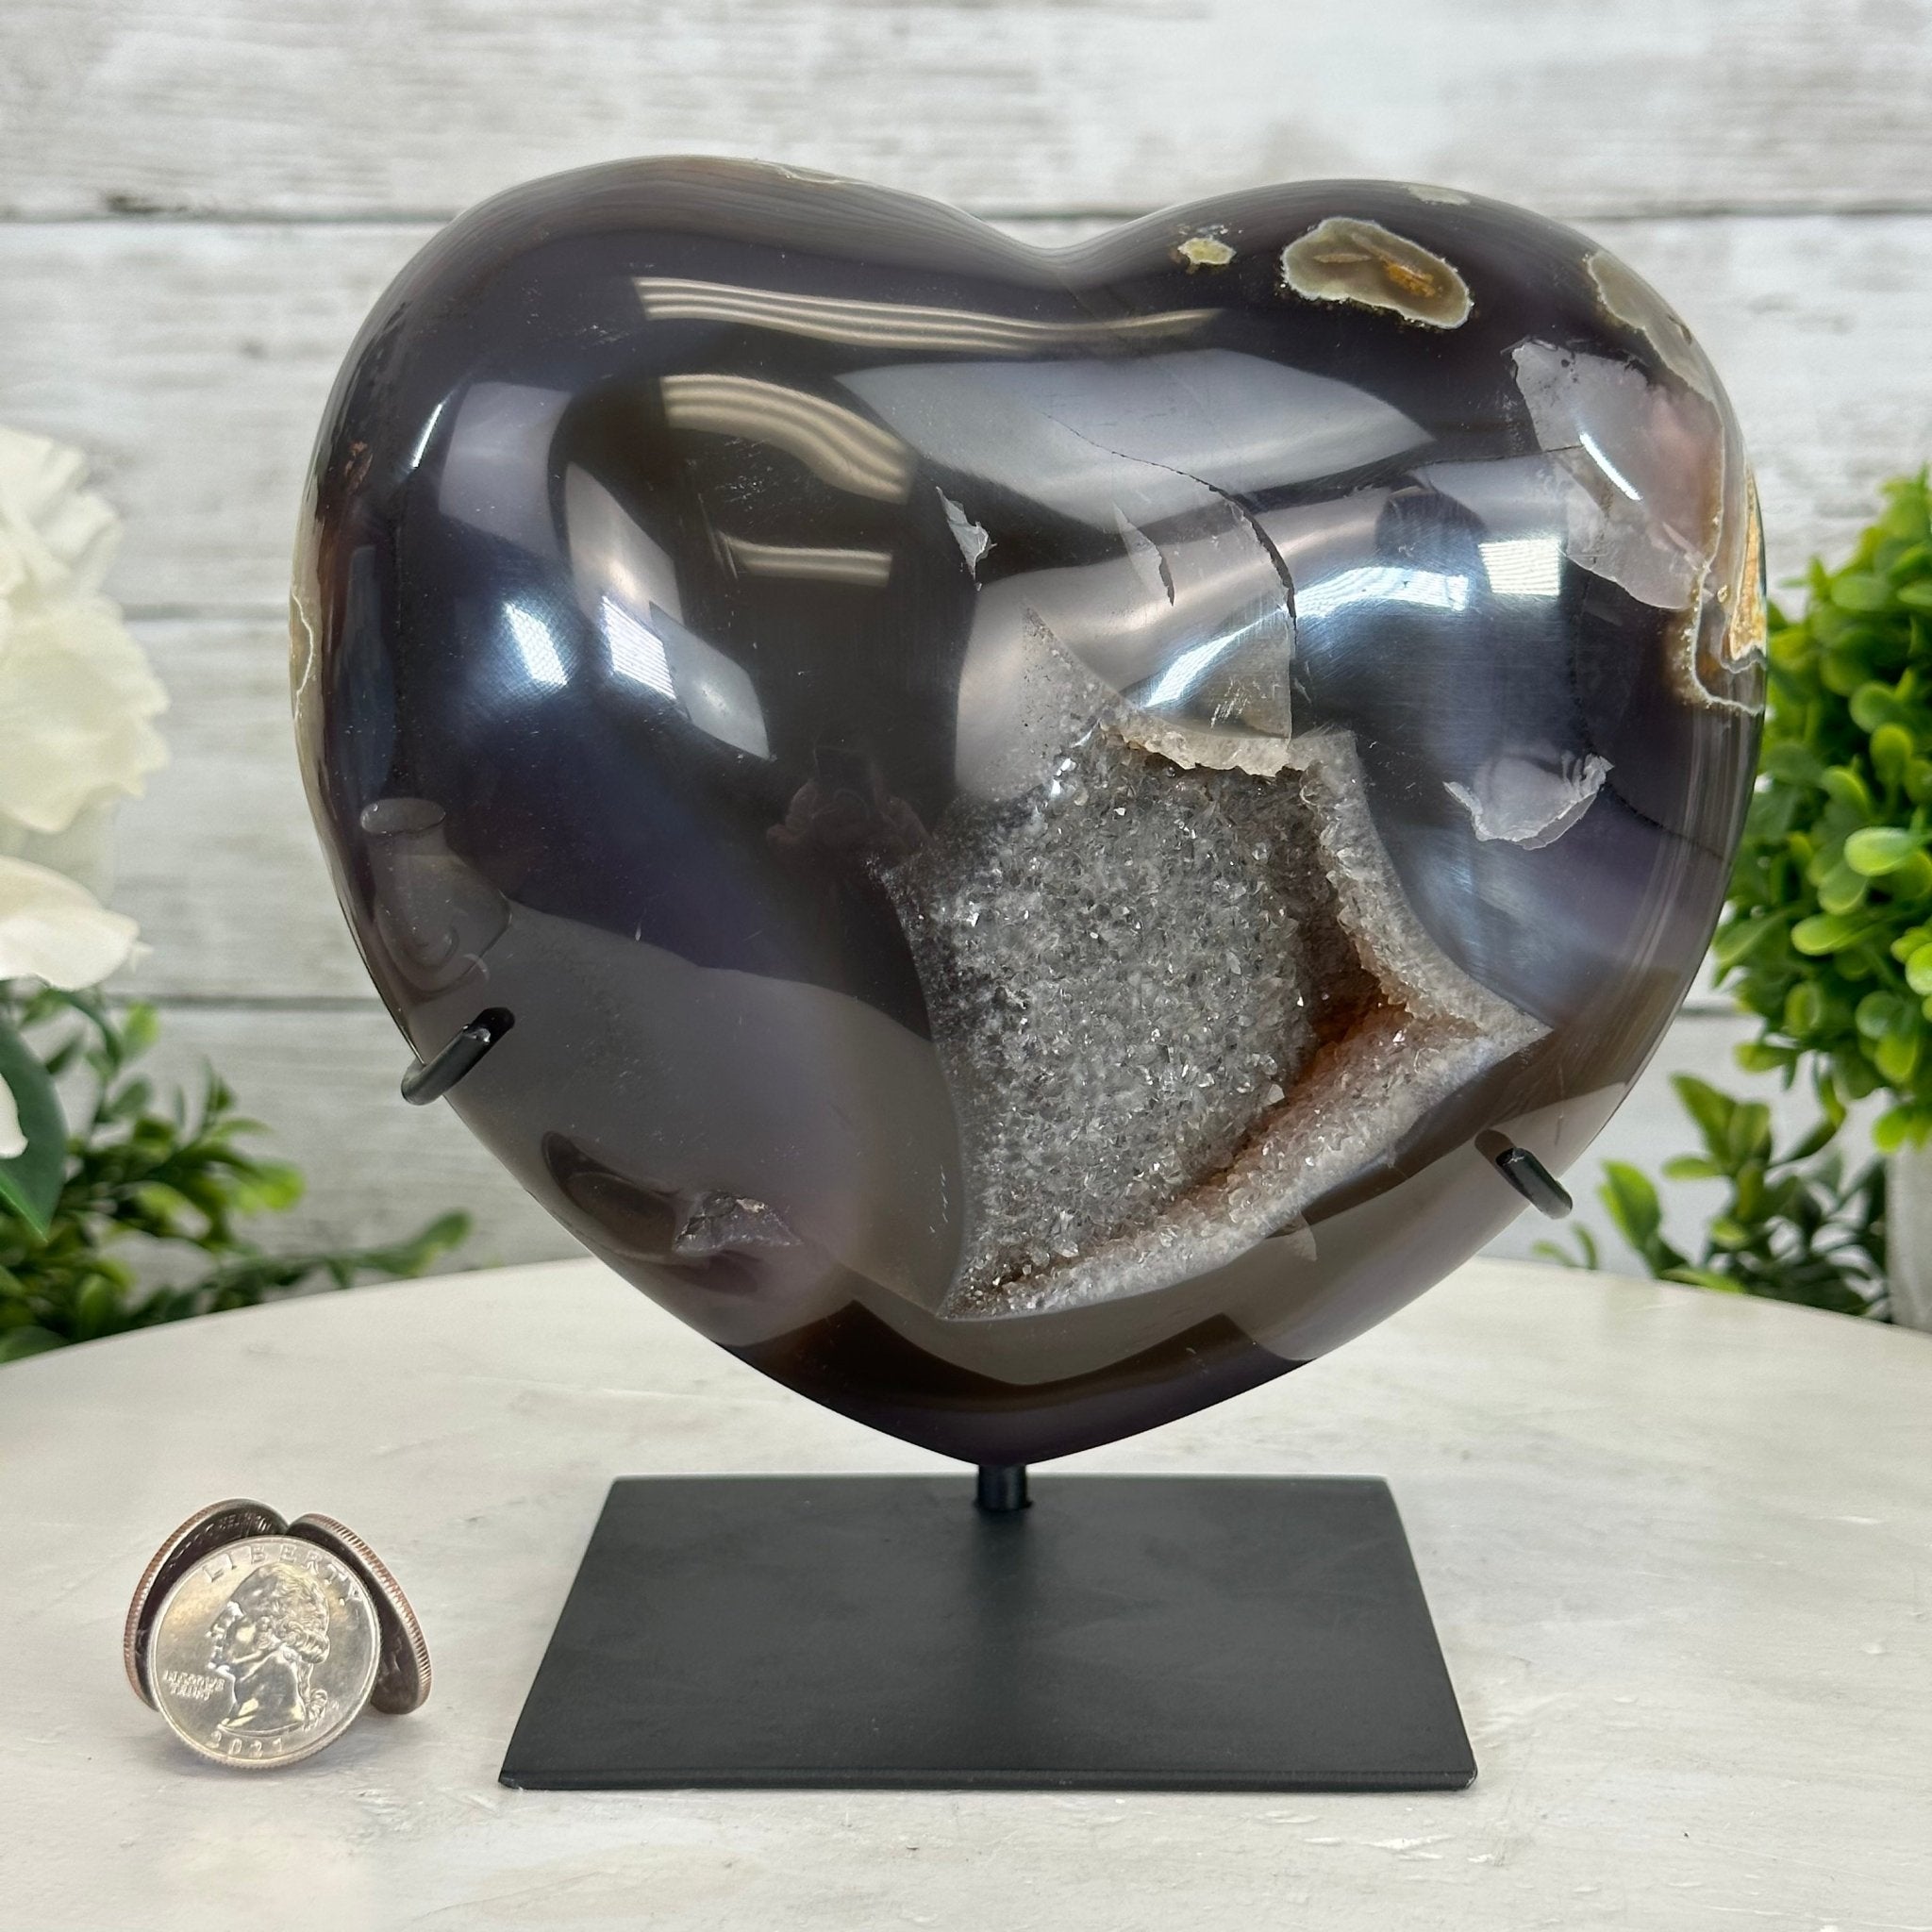 Polished Agate Heart-Shaped Geode on a Metal Stand, 5.4 lbs & 6.75" Tall, Model #5468-0014 by Brazil Gems - Brazil GemsBrazil GemsPolished Agate Heart-Shaped Geode on a Metal Stand, 5.4 lbs & 6.75" Tall, Model #5468-0014 by Brazil GemsHearts5468-0014